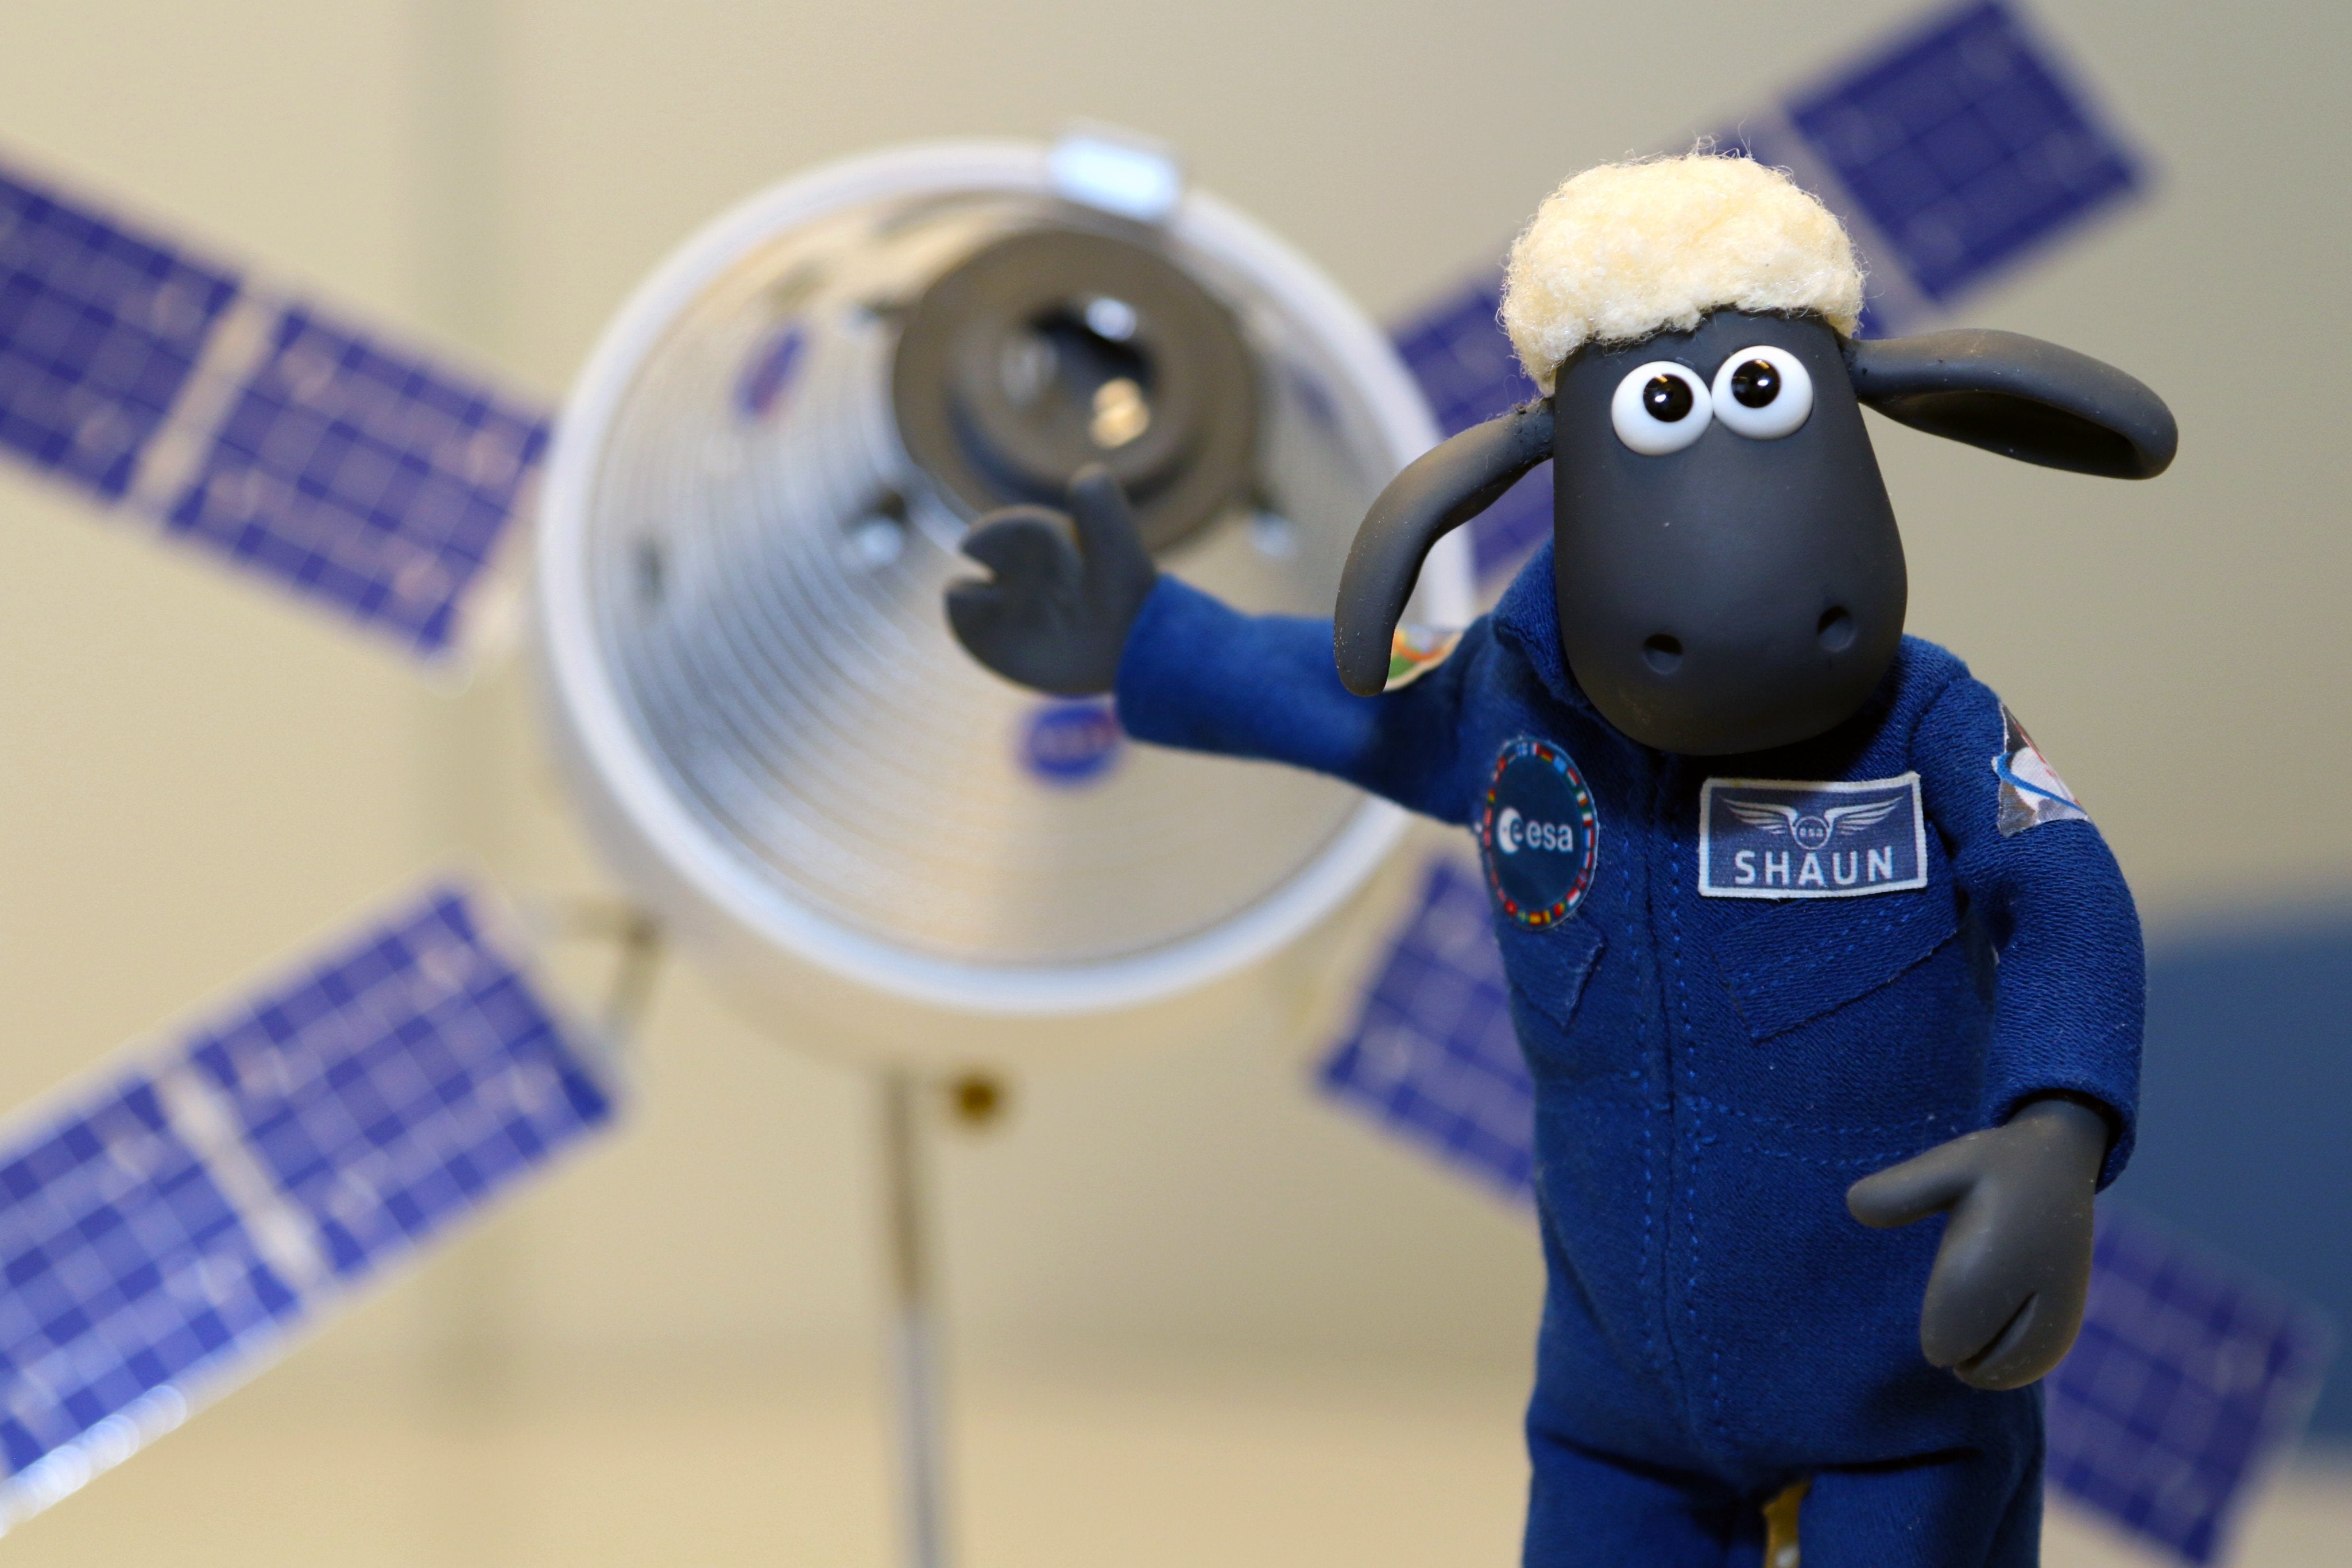 Beloved Aardman character Shaun the Sheep will soon go where no sheep has gone before